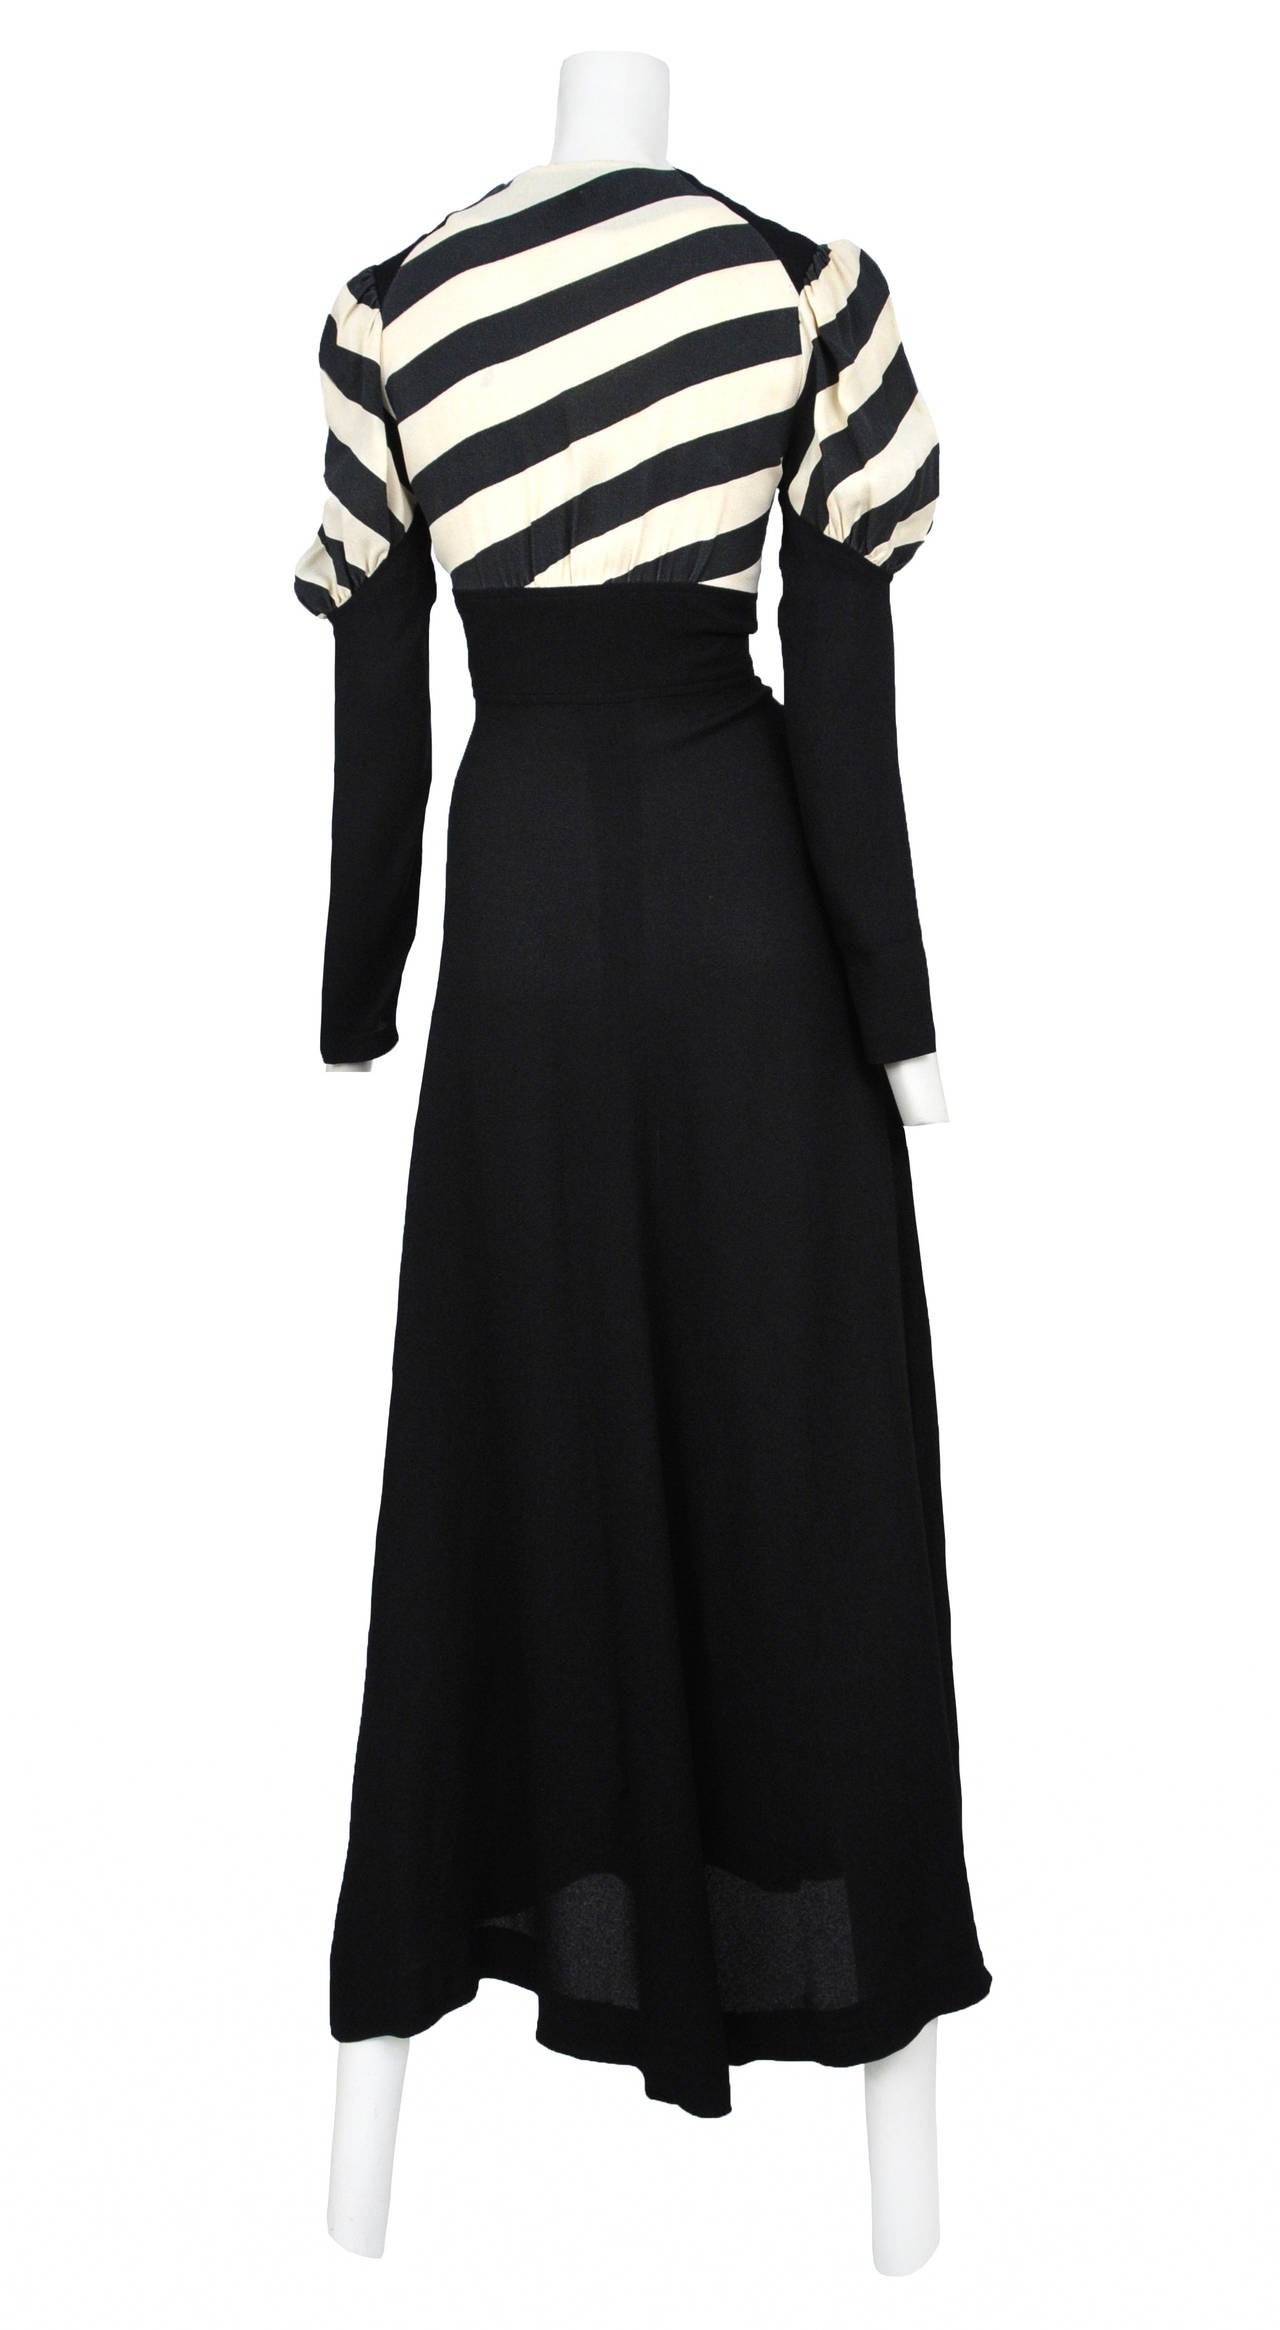 Vintage Ossie Clark moss crepe button front maxi dress featuring a black and white stripe print on the upper bodice and upper sleeve. The striped crepe is sewn into a deep v neckline and is attached to an empire black crepe button front skirt with